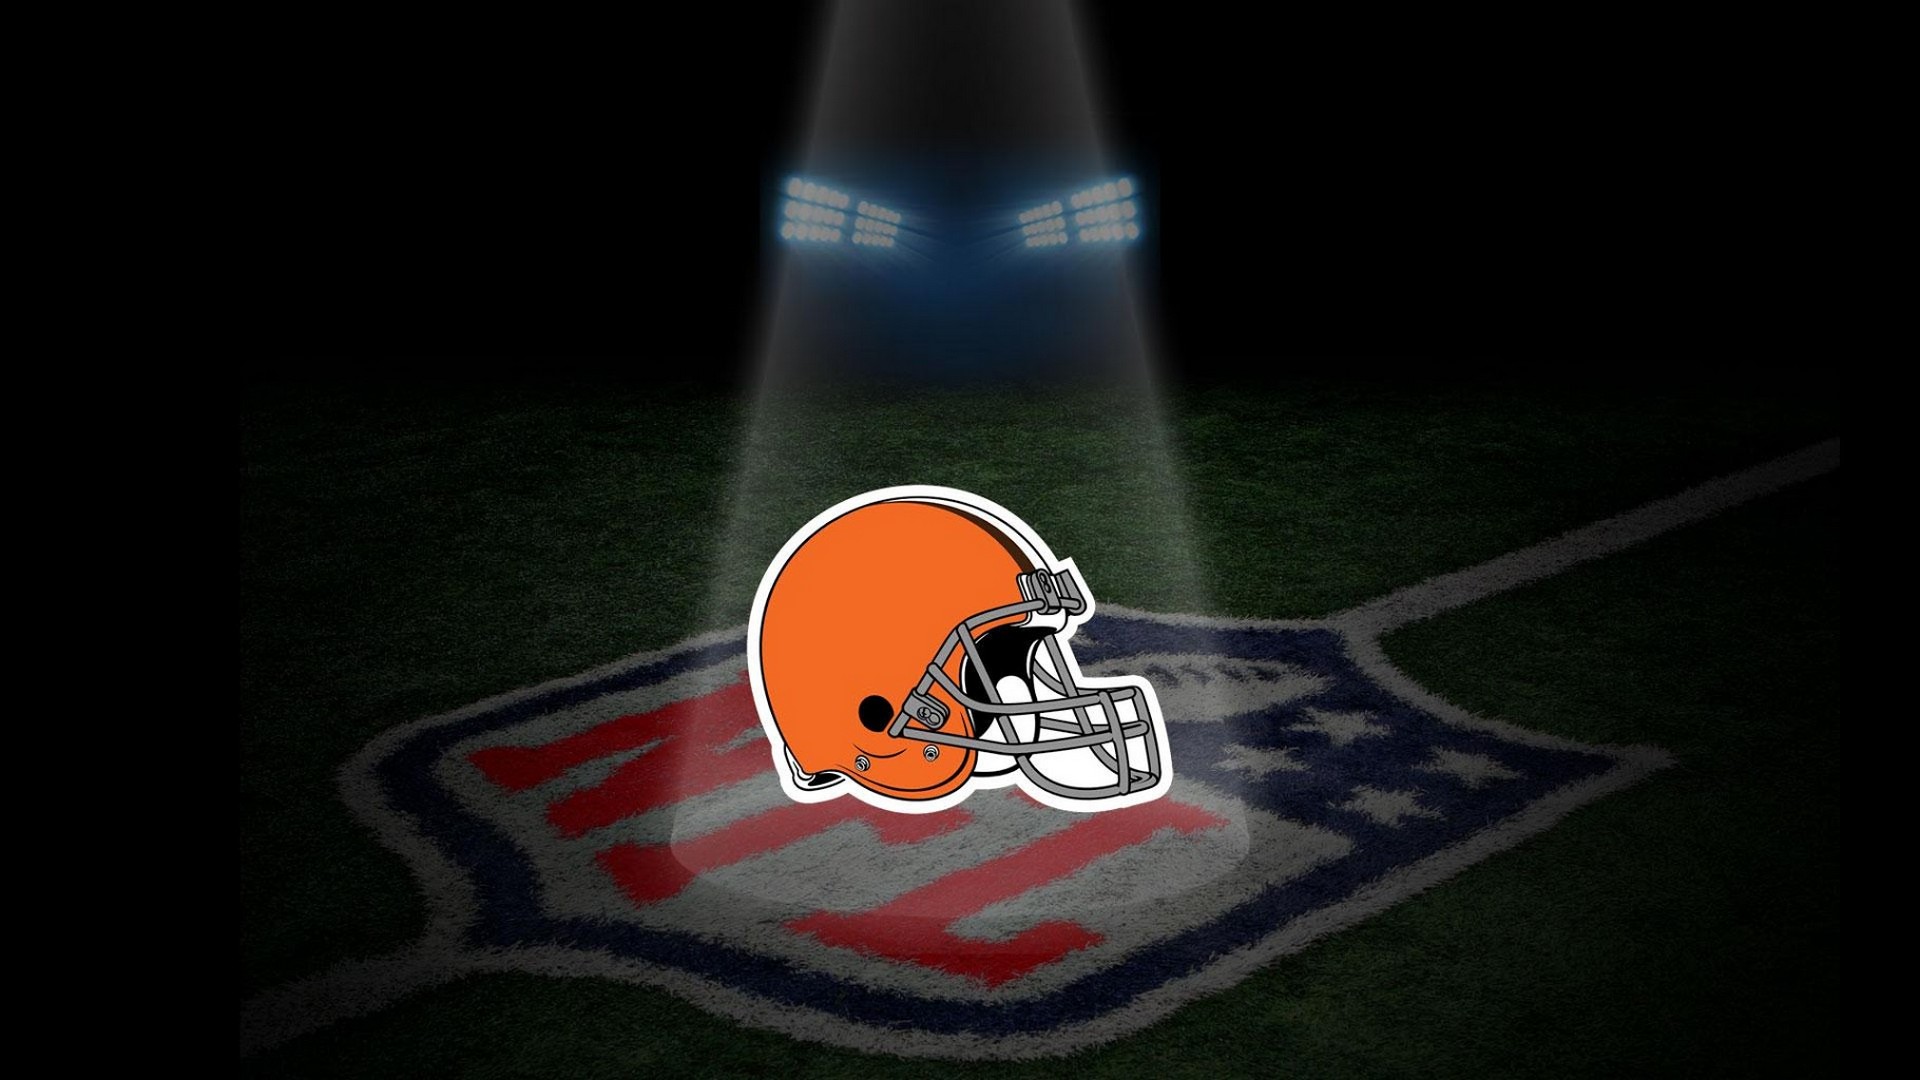 HD Cleveland Browns Backgrounds With high-resolution 1920X1080 pixel. Download and set as wallpaper for Desktop Computer, Apple iPhone X, XS Max, XR, 8, 7, 6, SE, iPad, Android